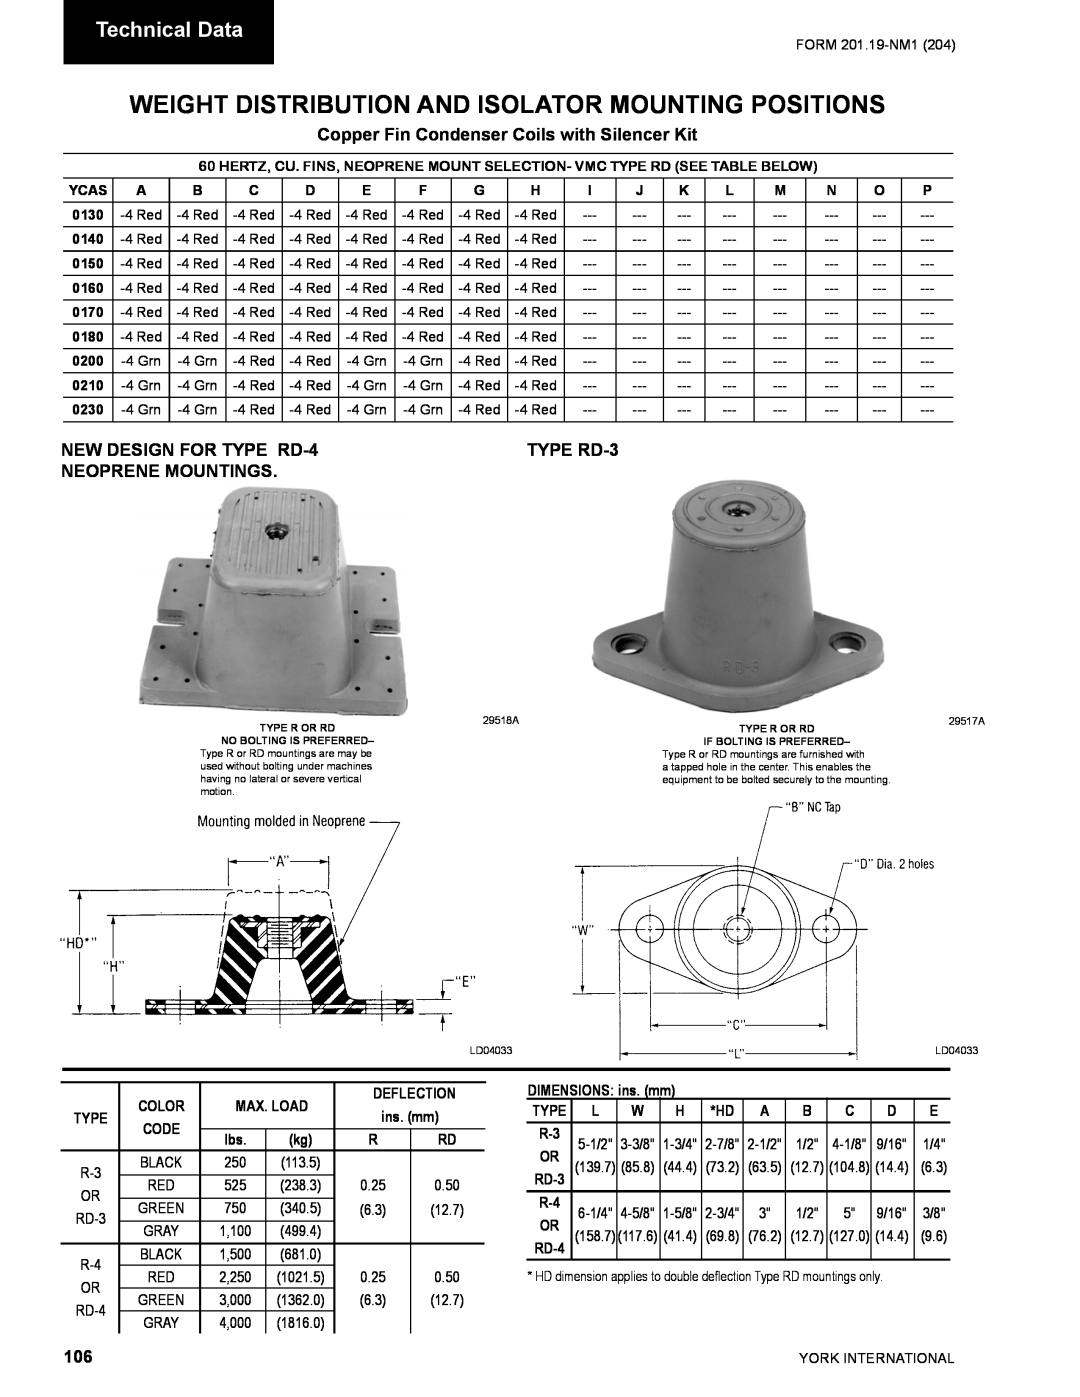 York YCAS0130 Weight Distribution And Isolator Mounting Positions, Technical Data, NEW DESIGN FOR TYPE RD-4, TYPE RD-3 